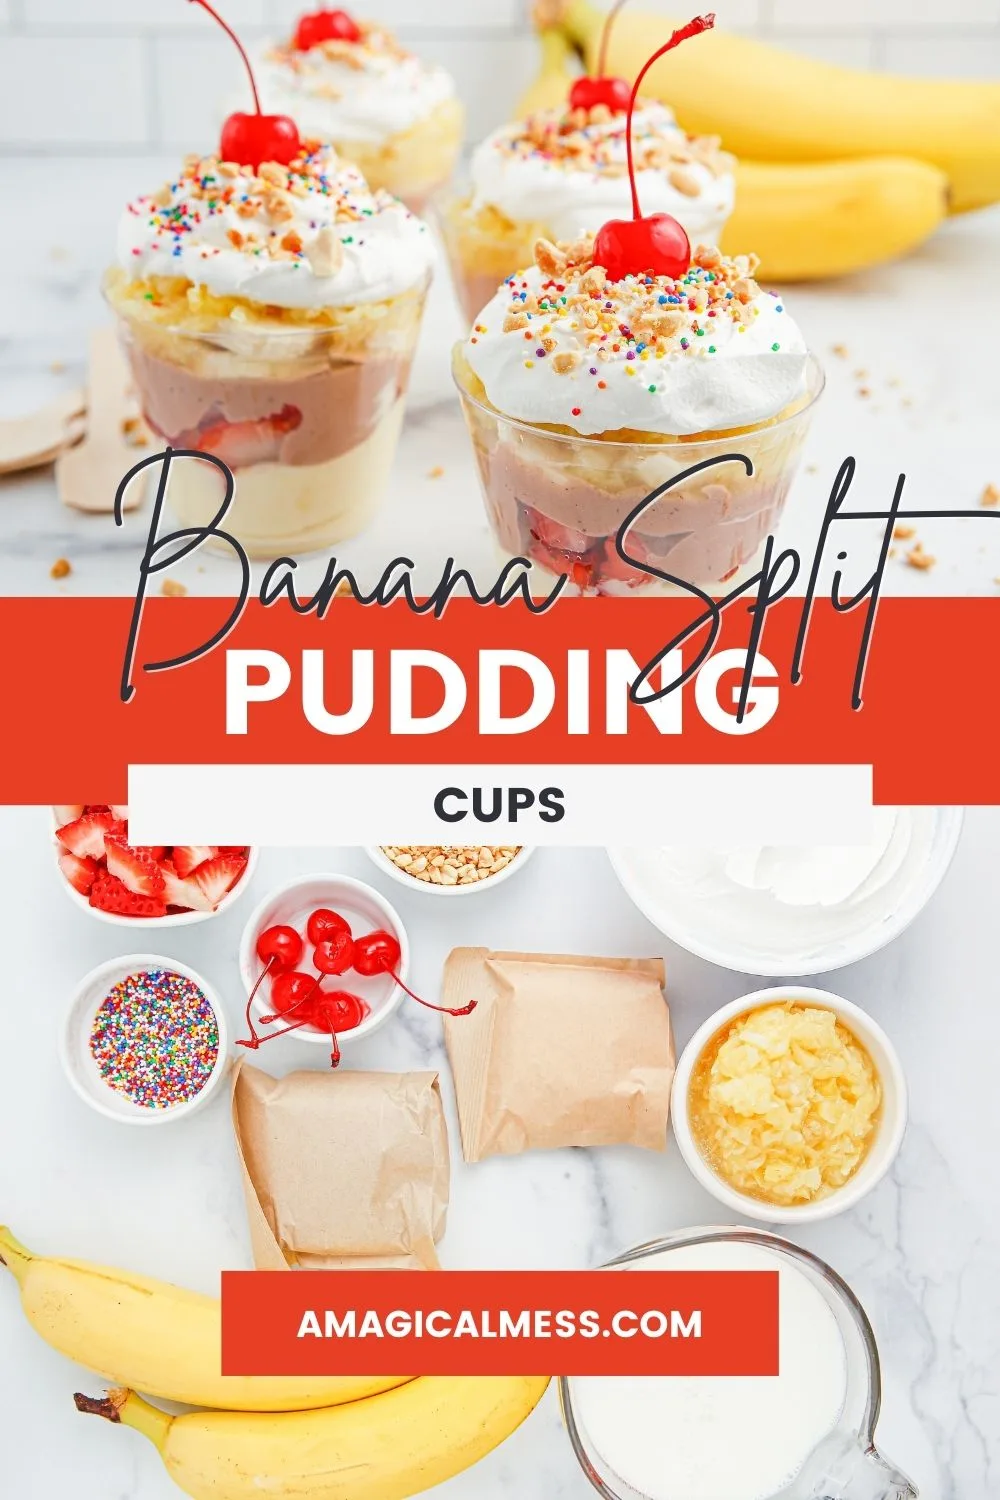 Banana pudding cups and all the ingredients to make them.